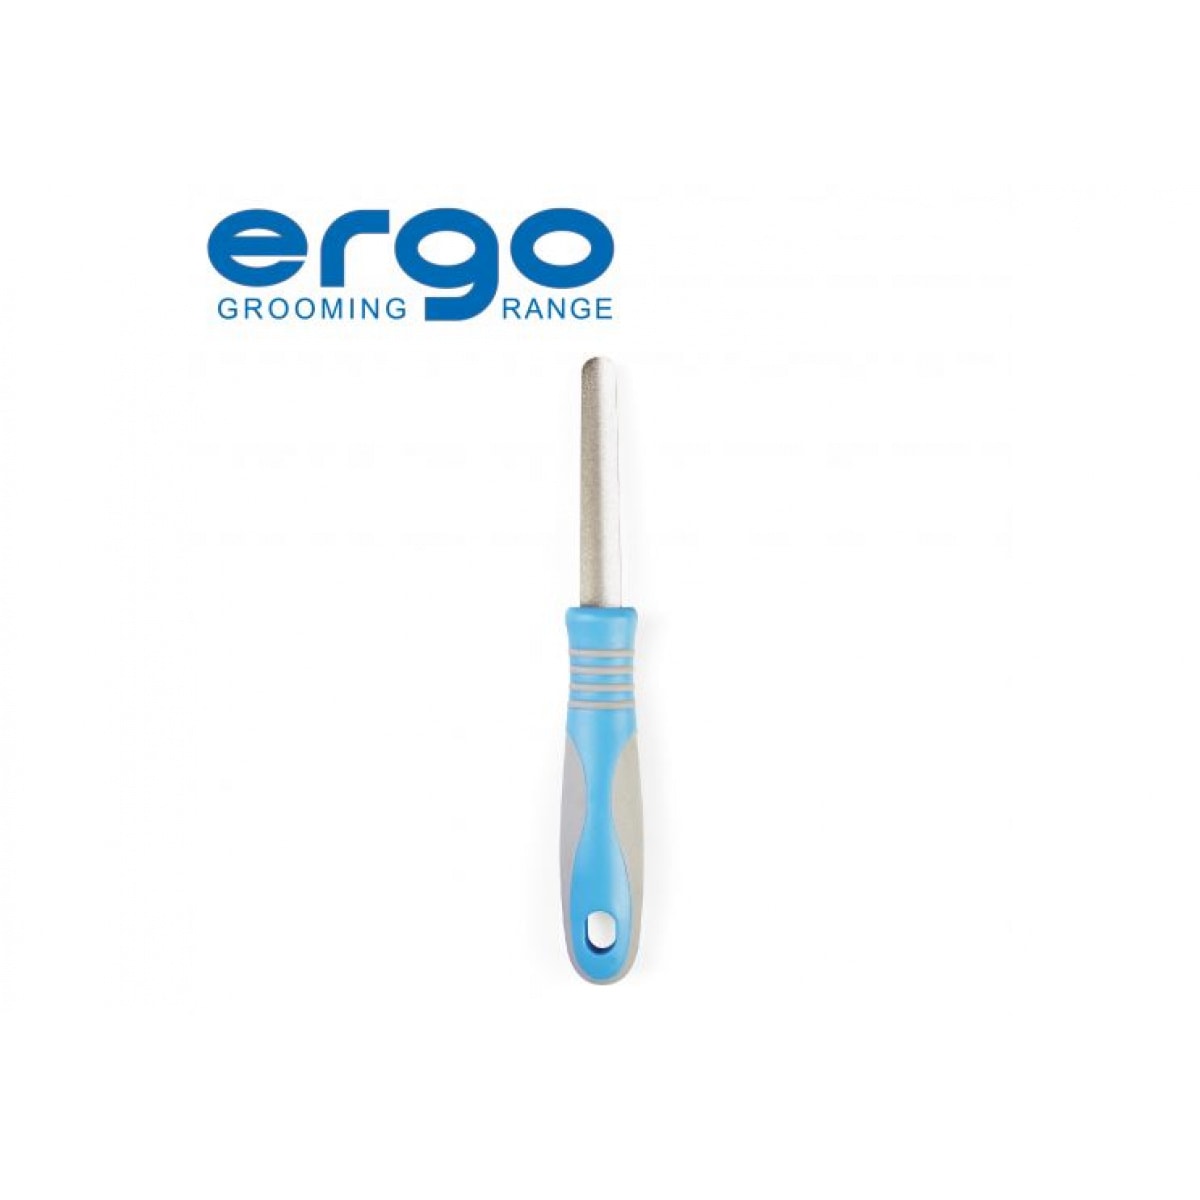 Ergo – Nail File – Pawfect Supplies Ltd Product Image